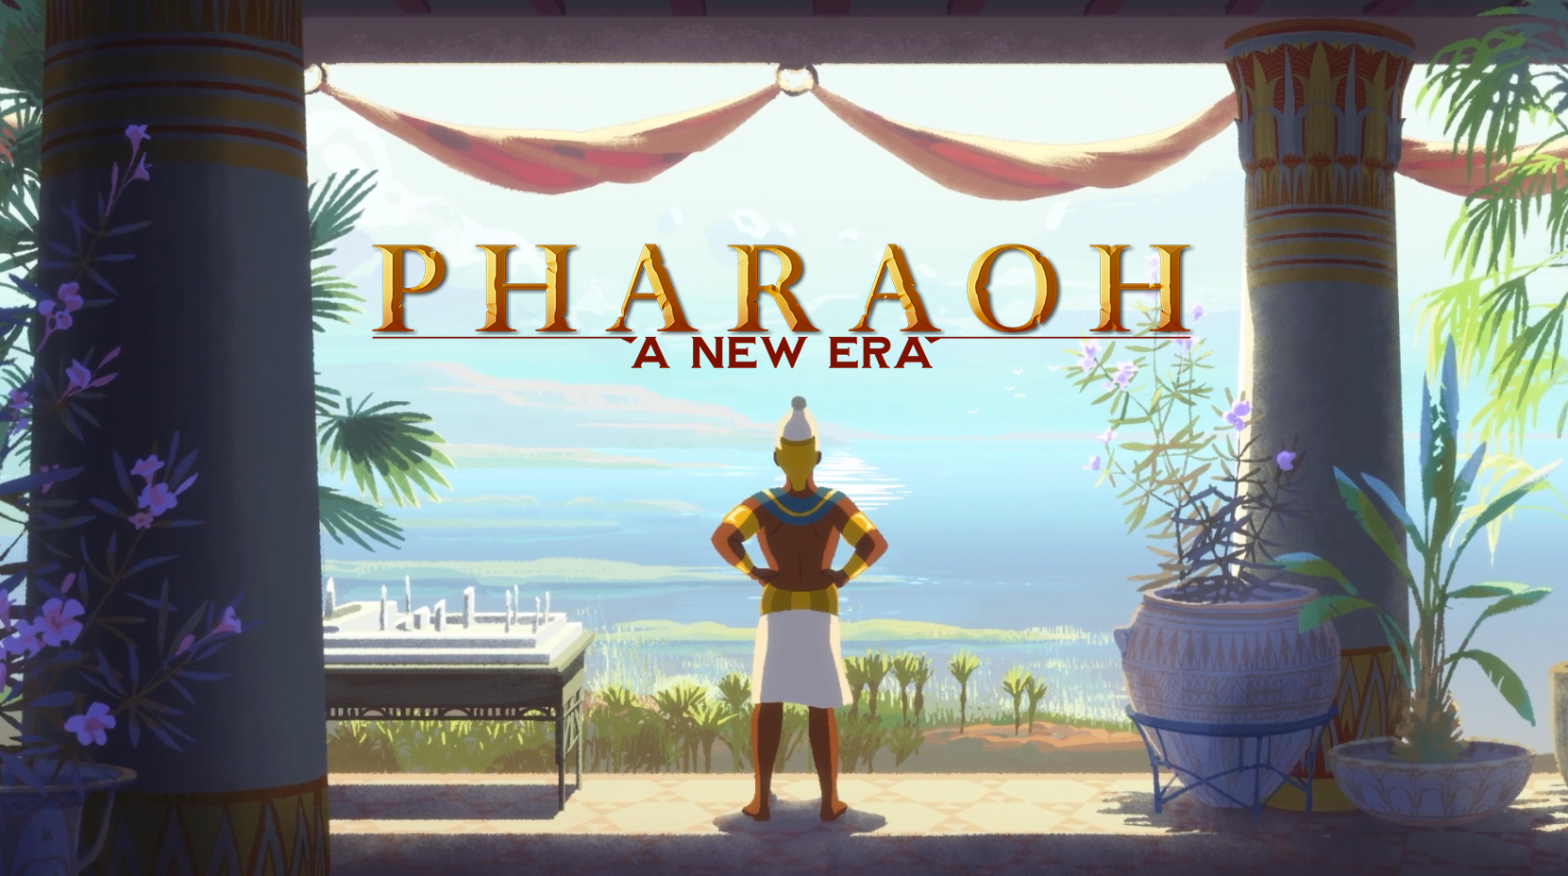 PHARAOH: A NEW ERA IS NOW AVAILABLE!